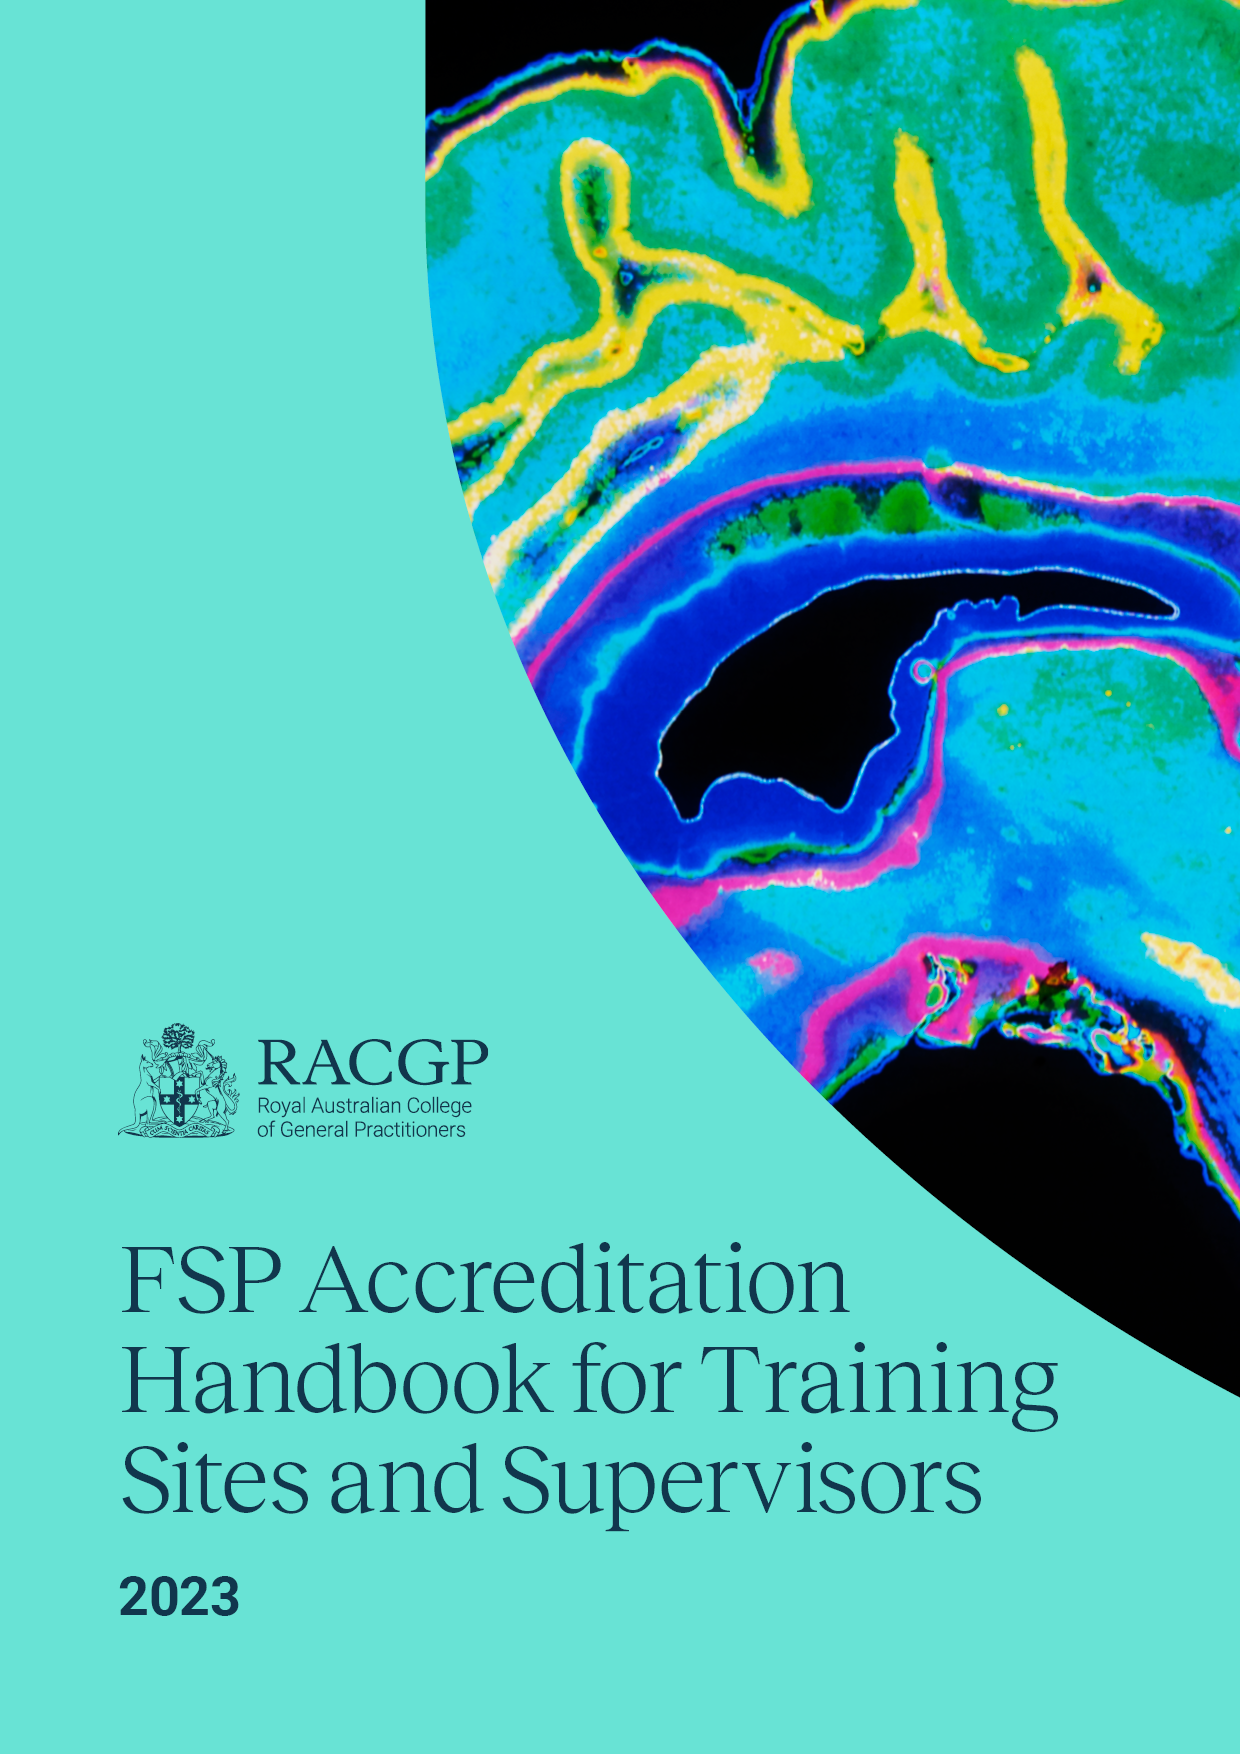 FSP Accreditation Handbook for Training Sites and Supervisors